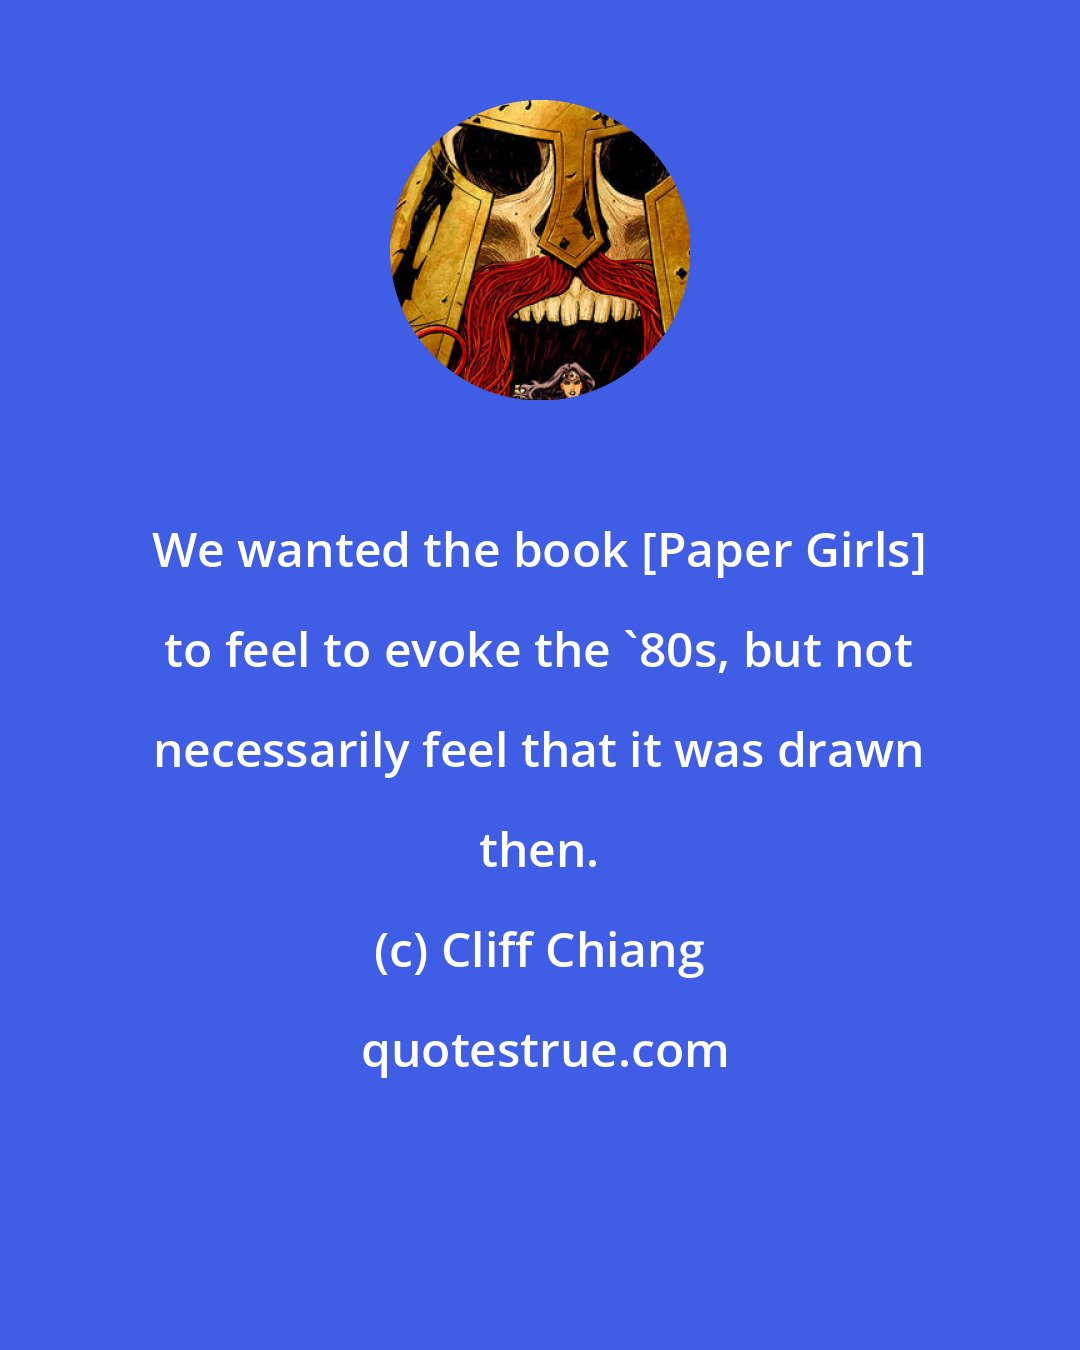 Cliff Chiang: We wanted the book [Paper Girls] to feel to evoke the '80s, but not necessarily feel that it was drawn then.